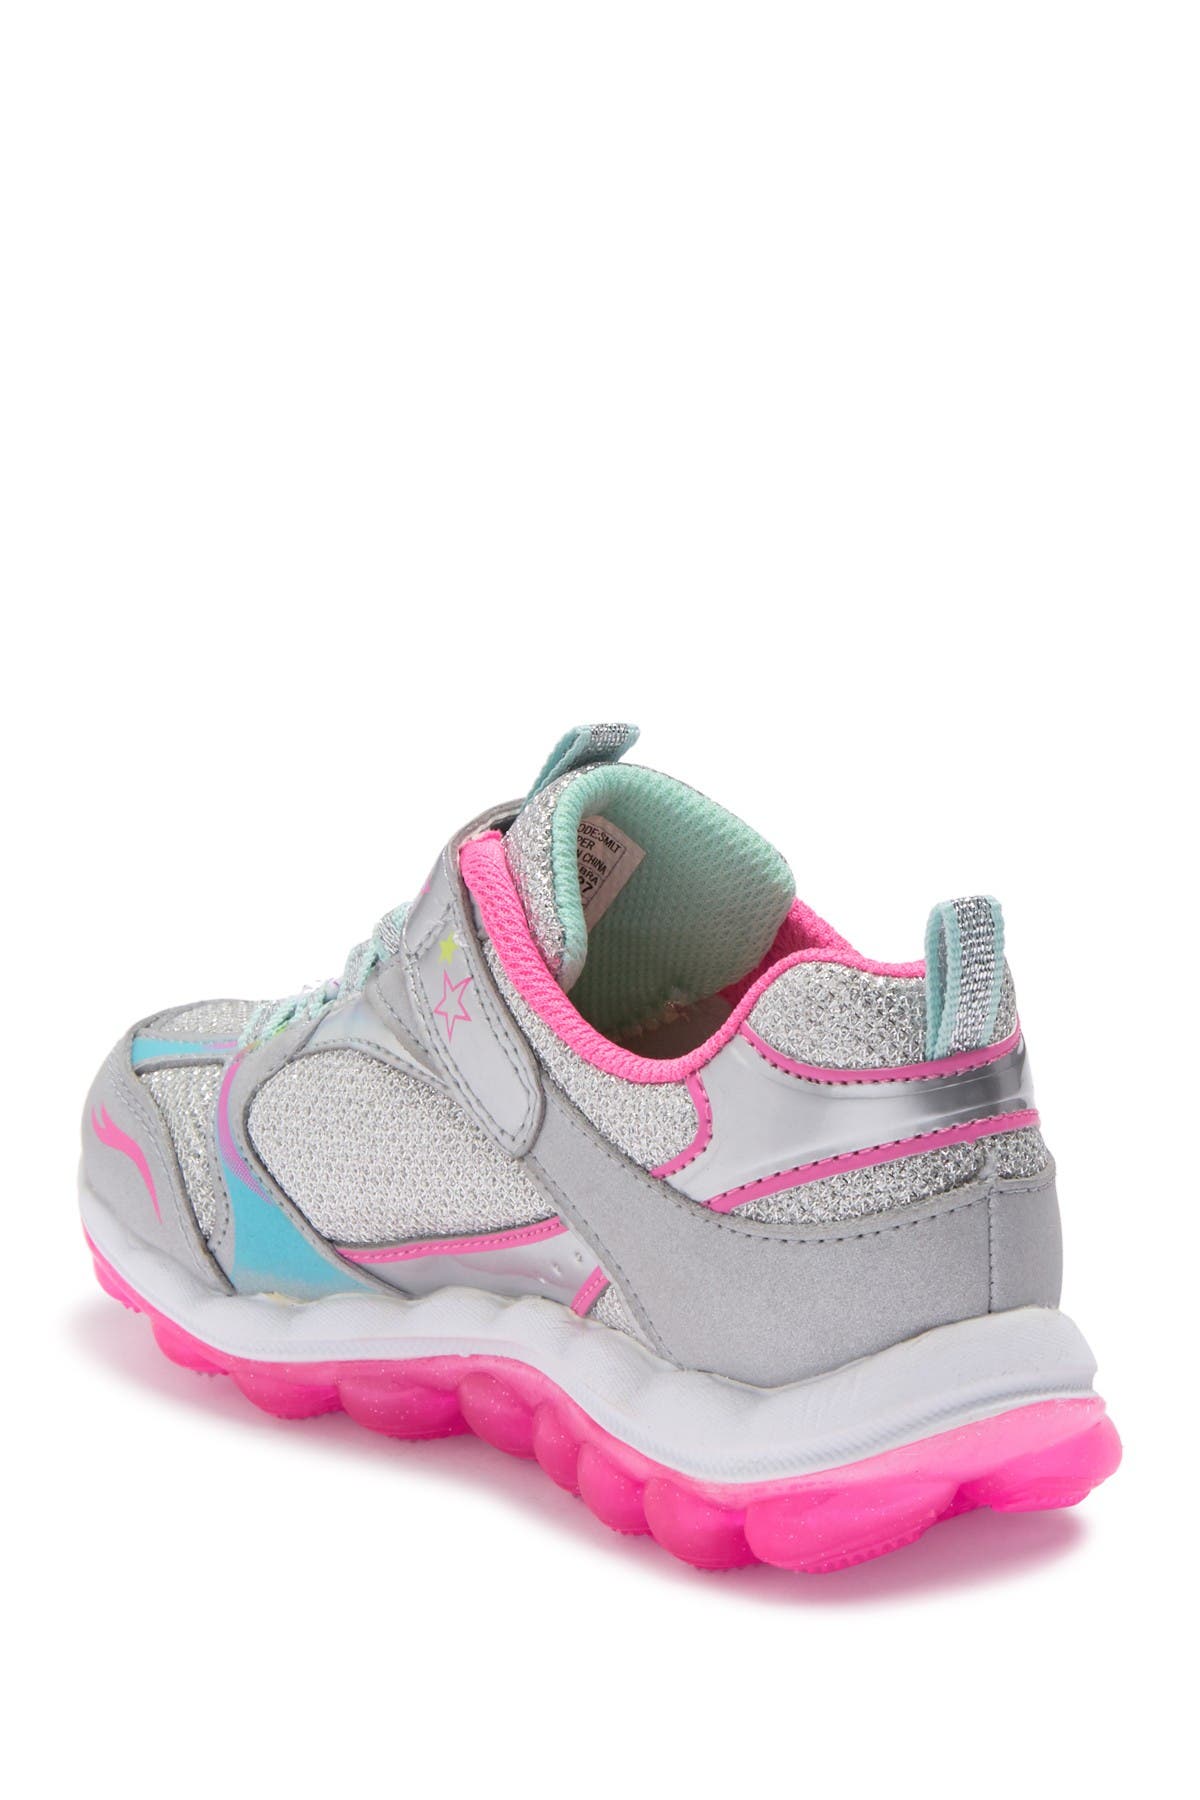 skechers with bubbles on bottom